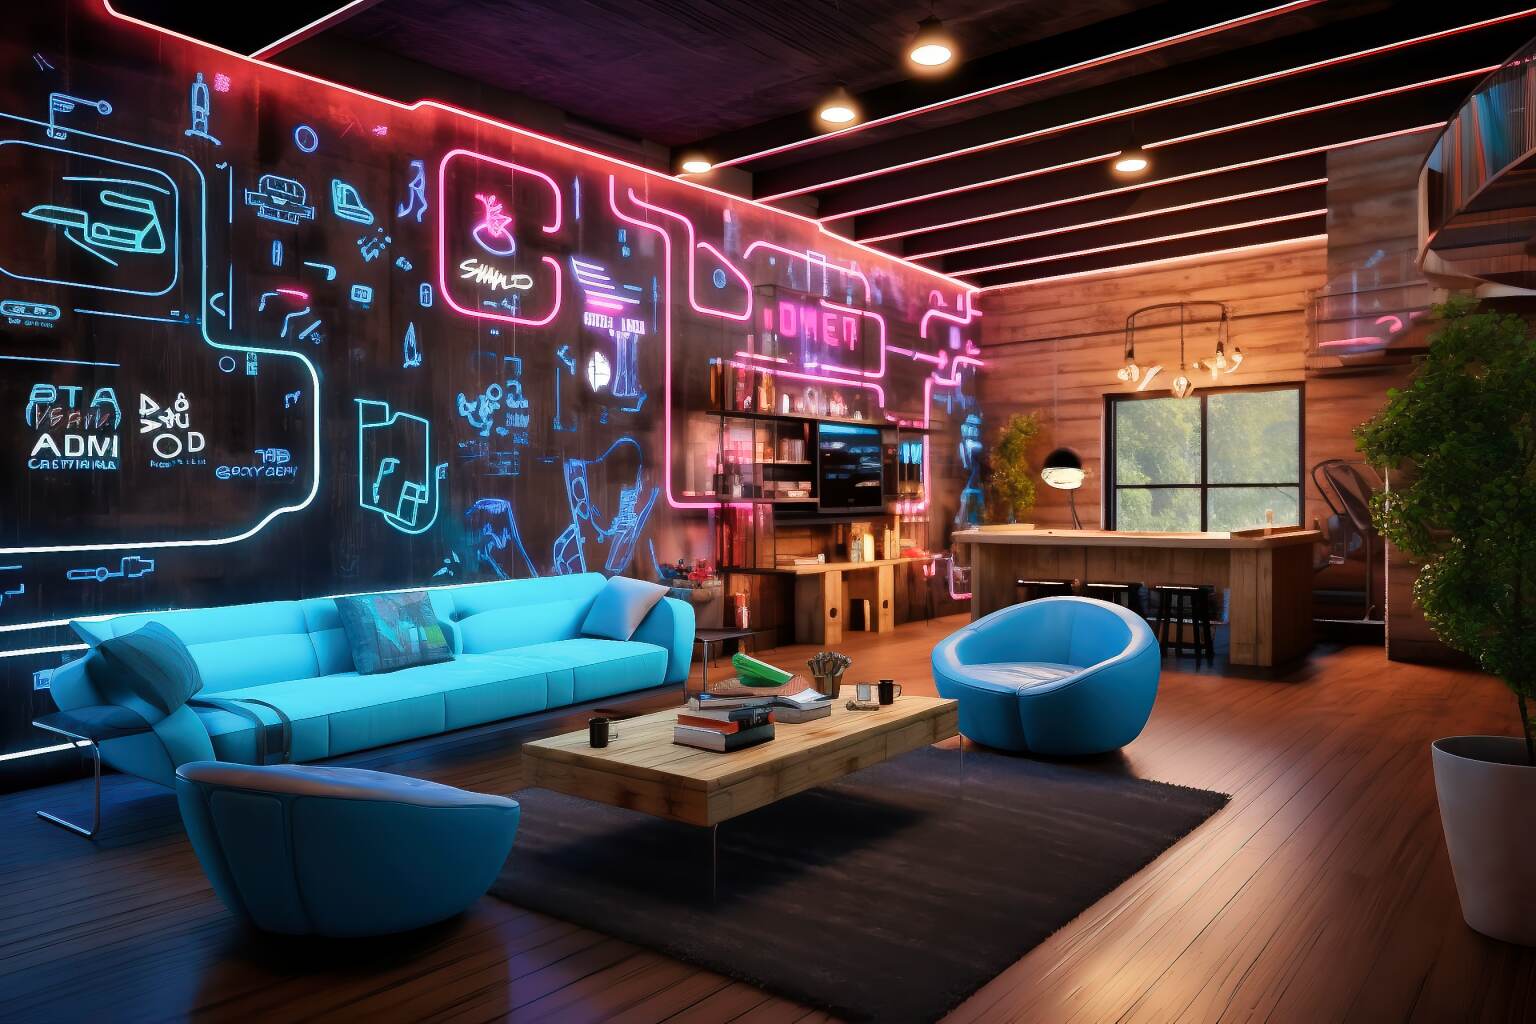 Cyber Cafe This Cyberpunk Inspired Living Room